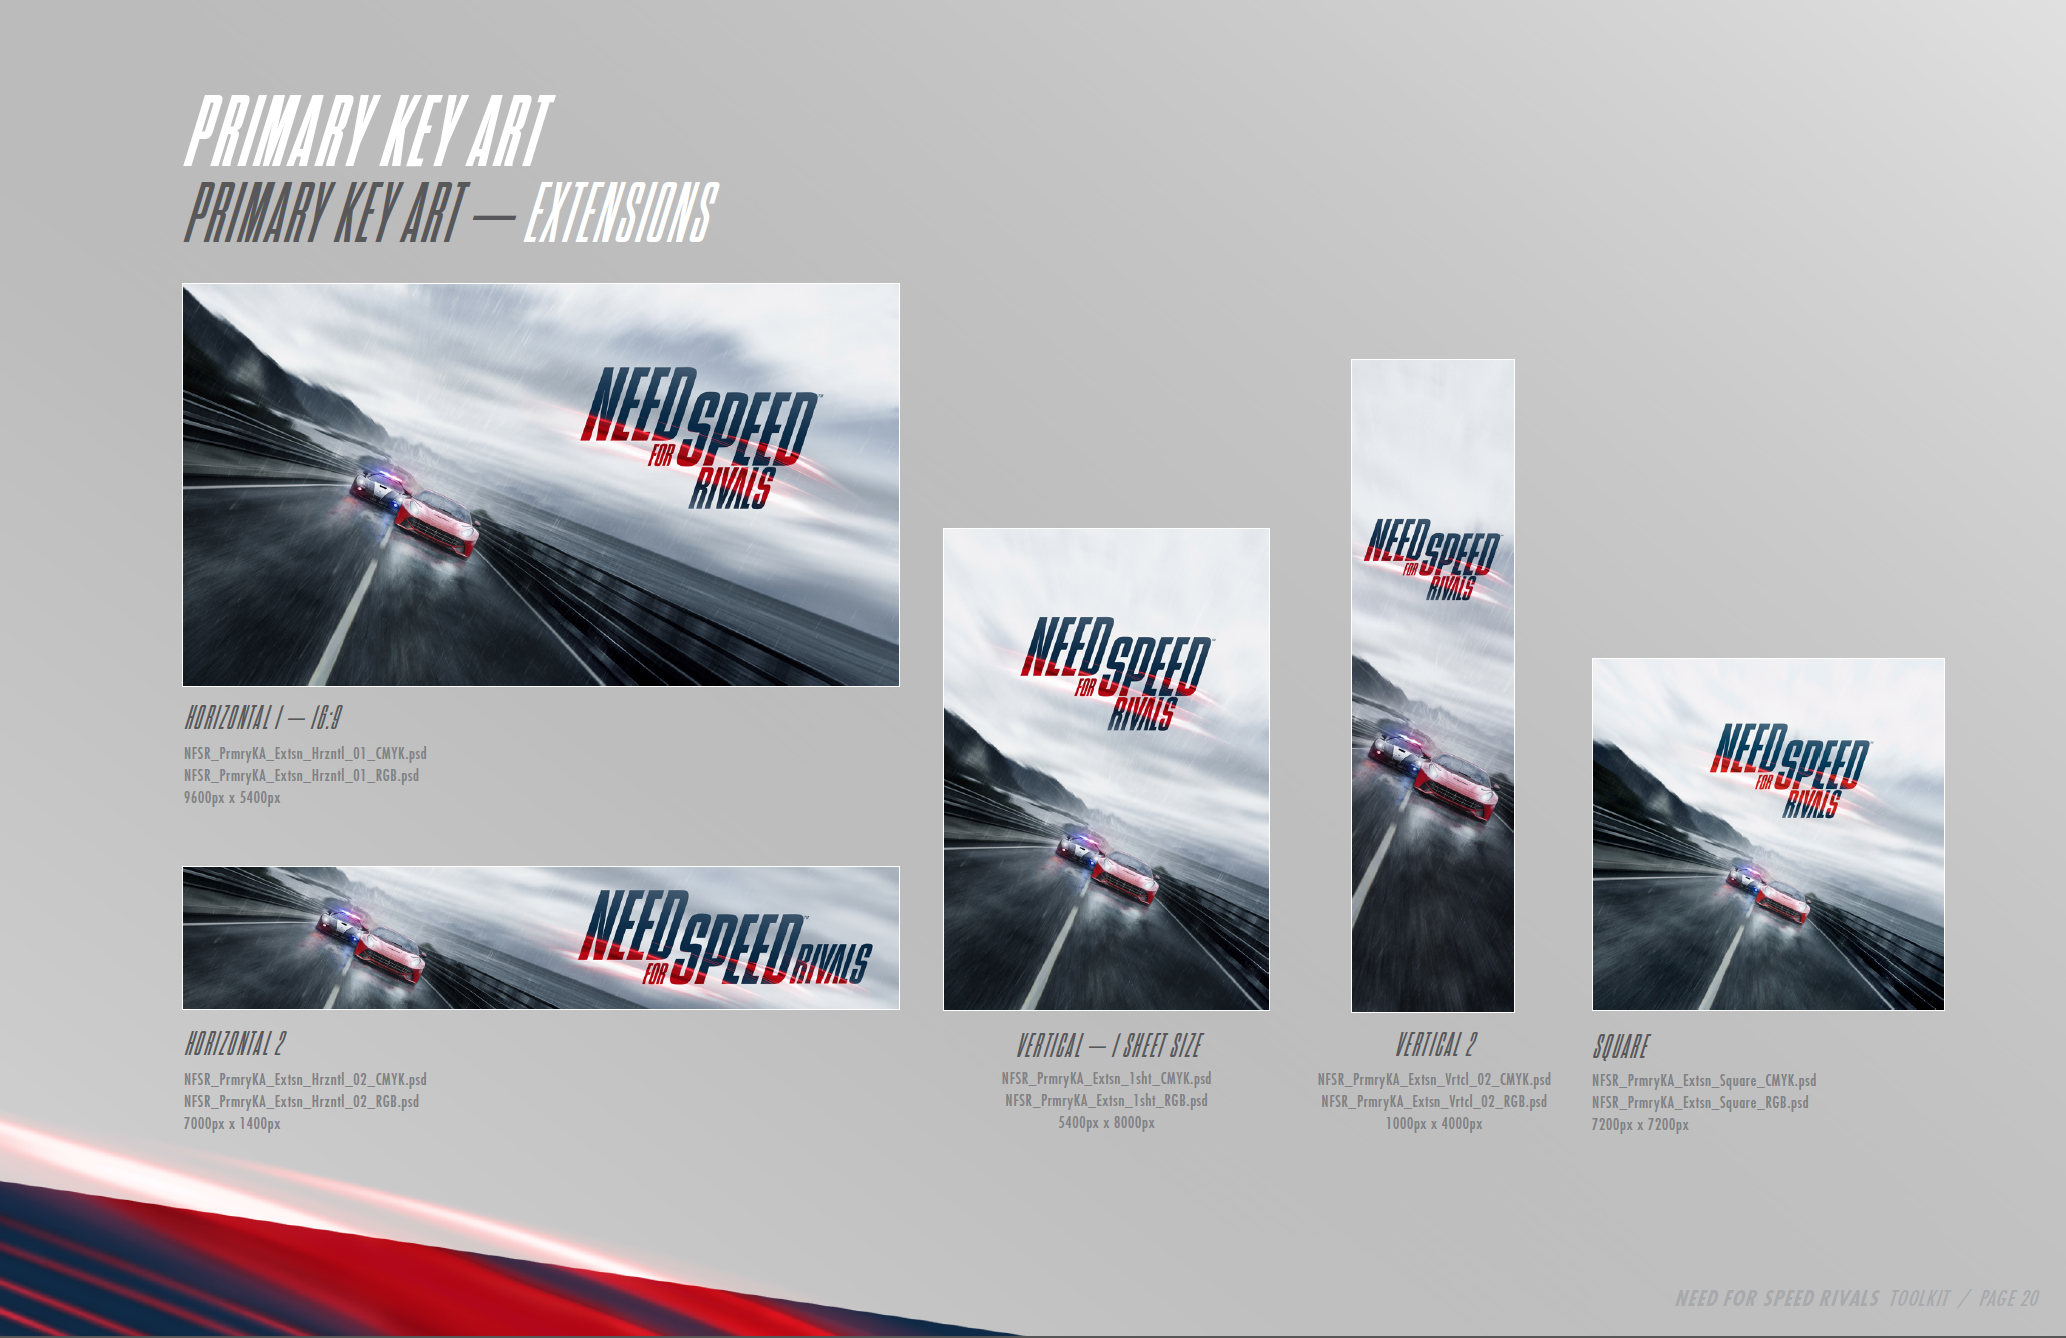 NFS_toolkit20.png